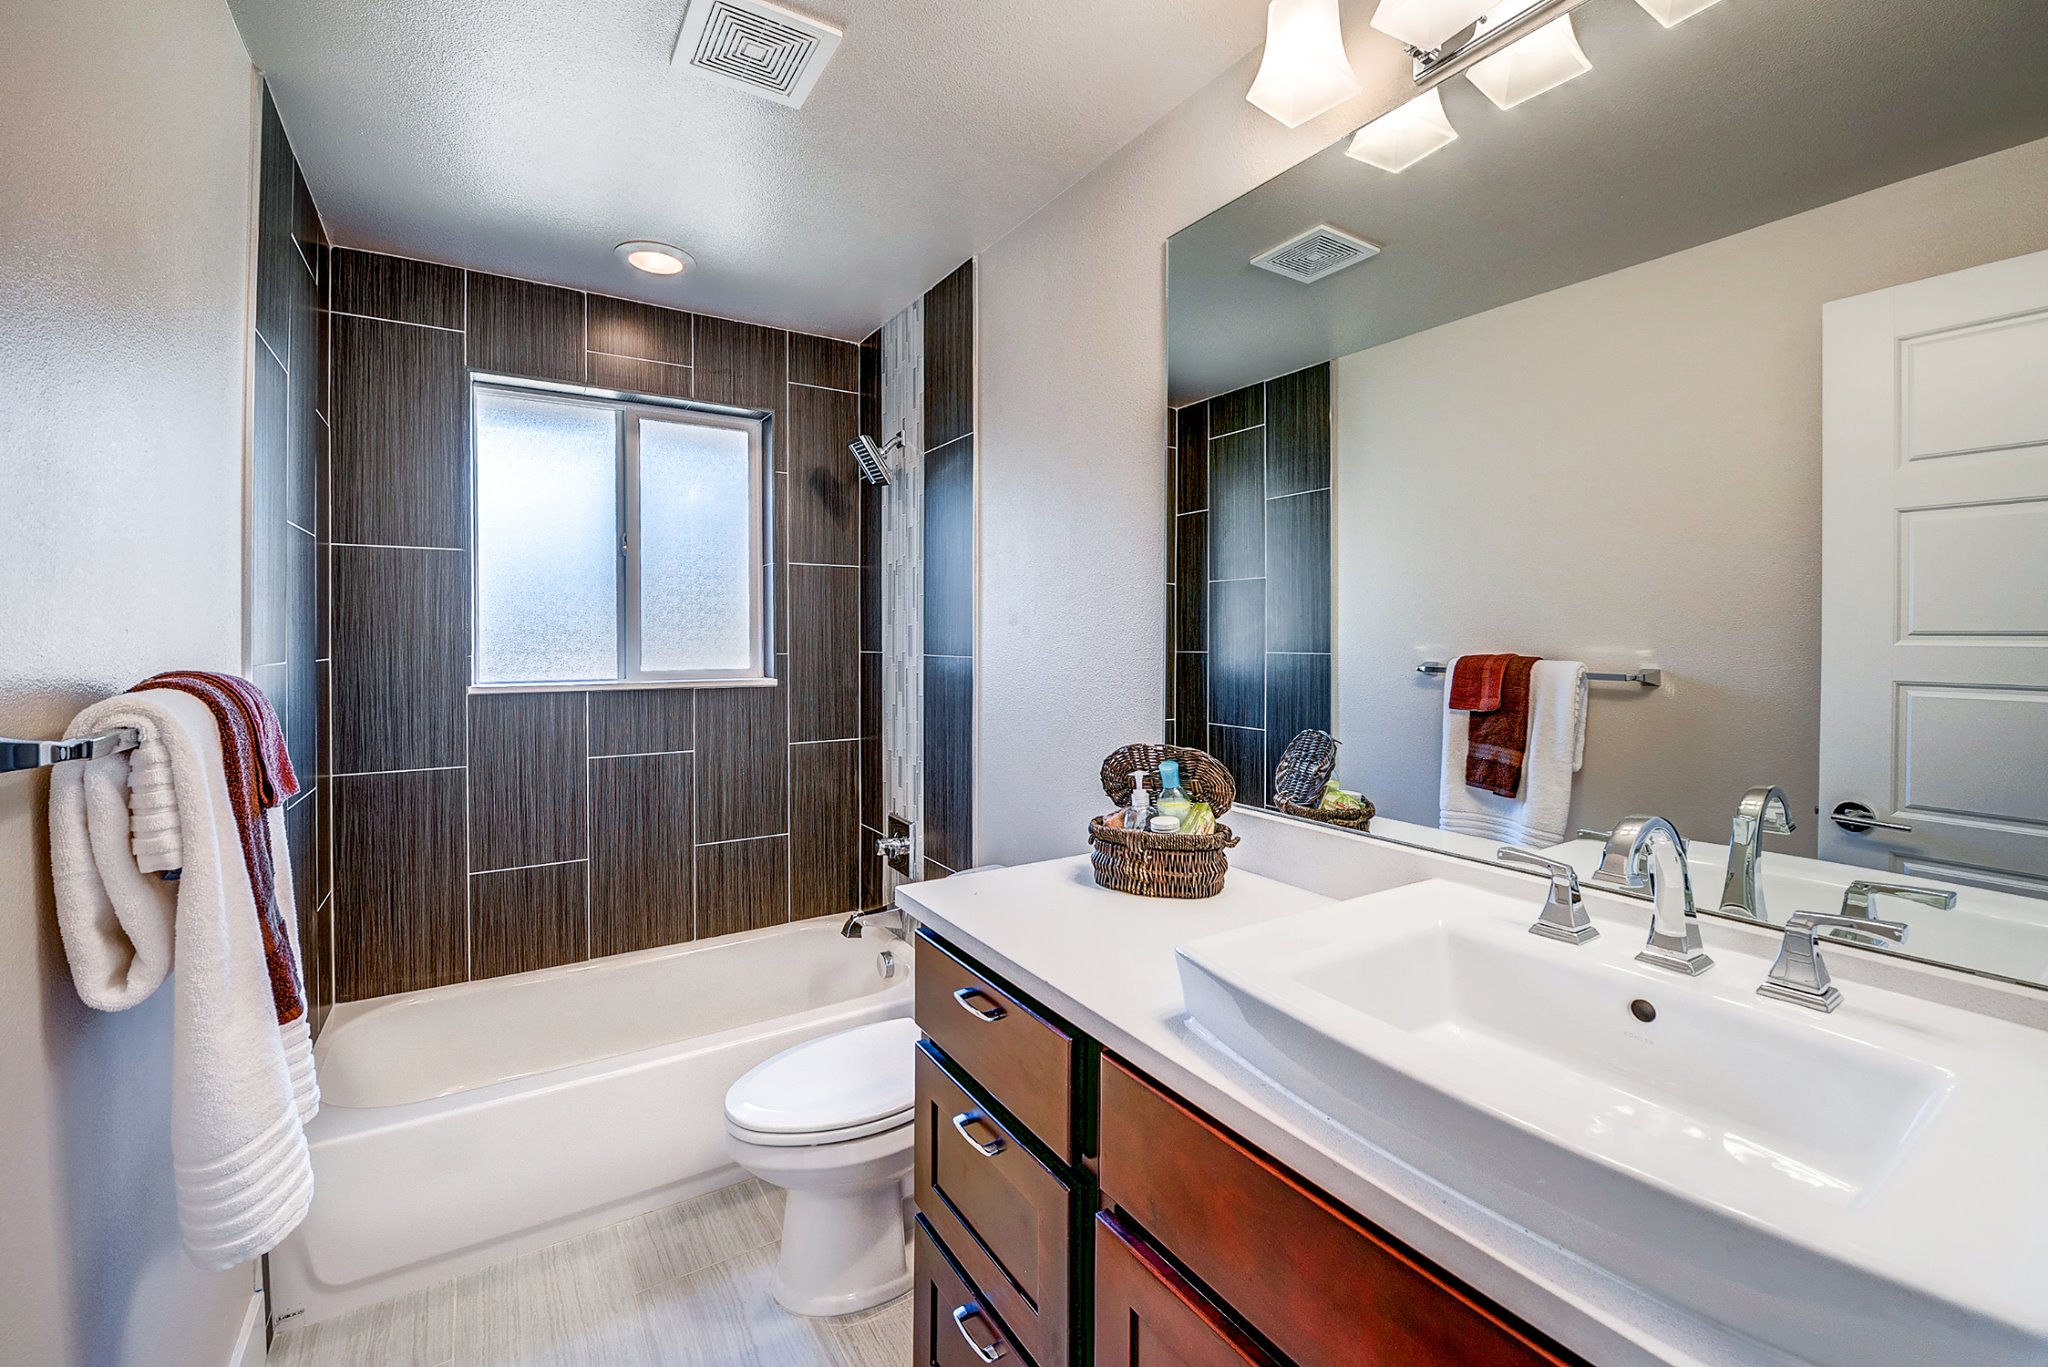 Should You Remodel Your Bathroom(s) Before You Sell?